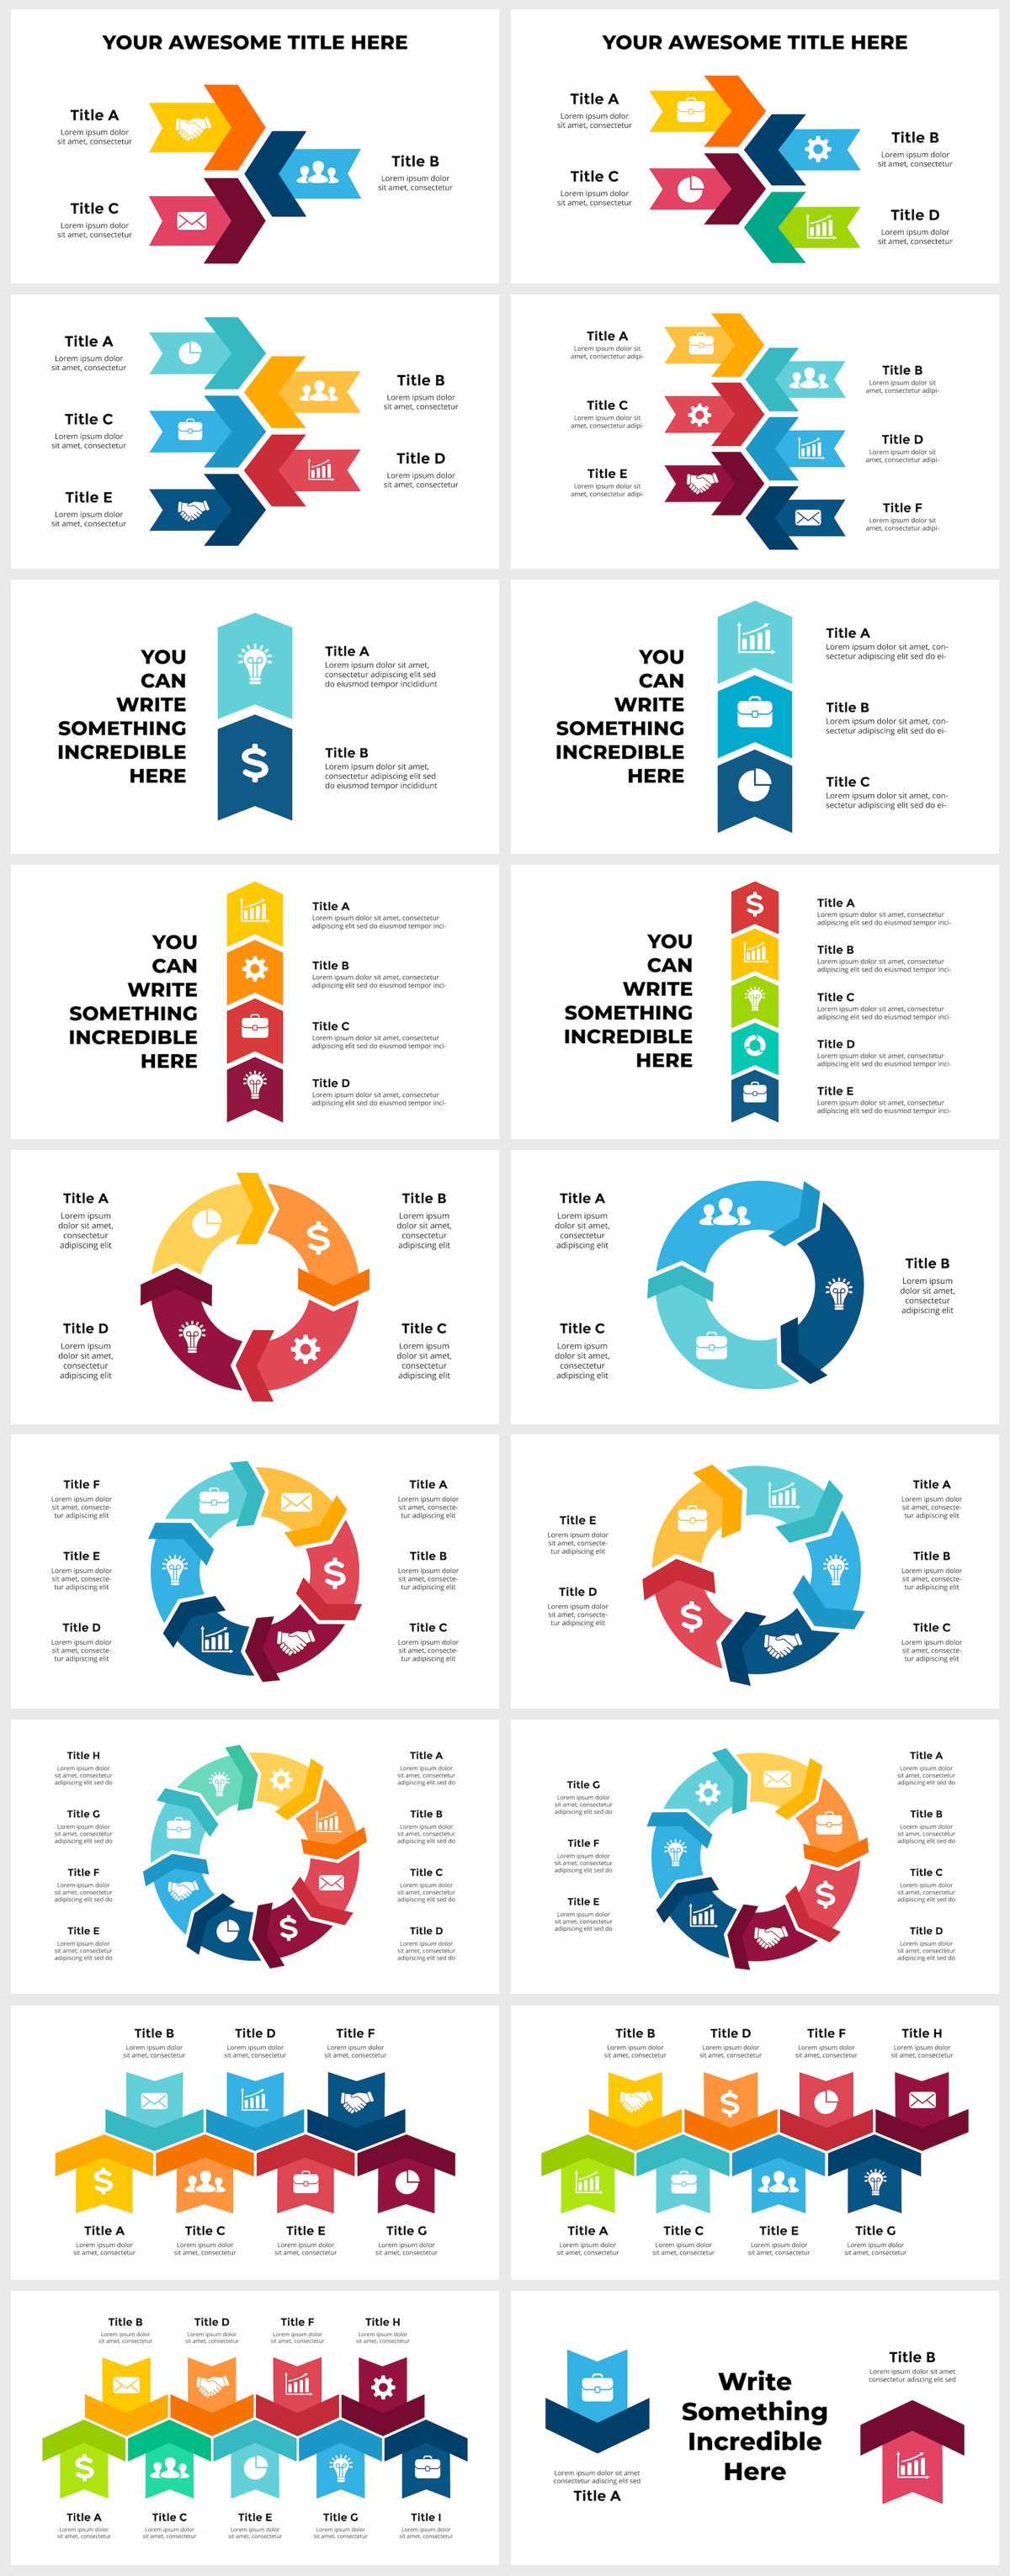 Wowly - 3500 Infographics & Presentation Templates! Updated! PowerPoint Canva Figma Sketch Ai Psd. - 208